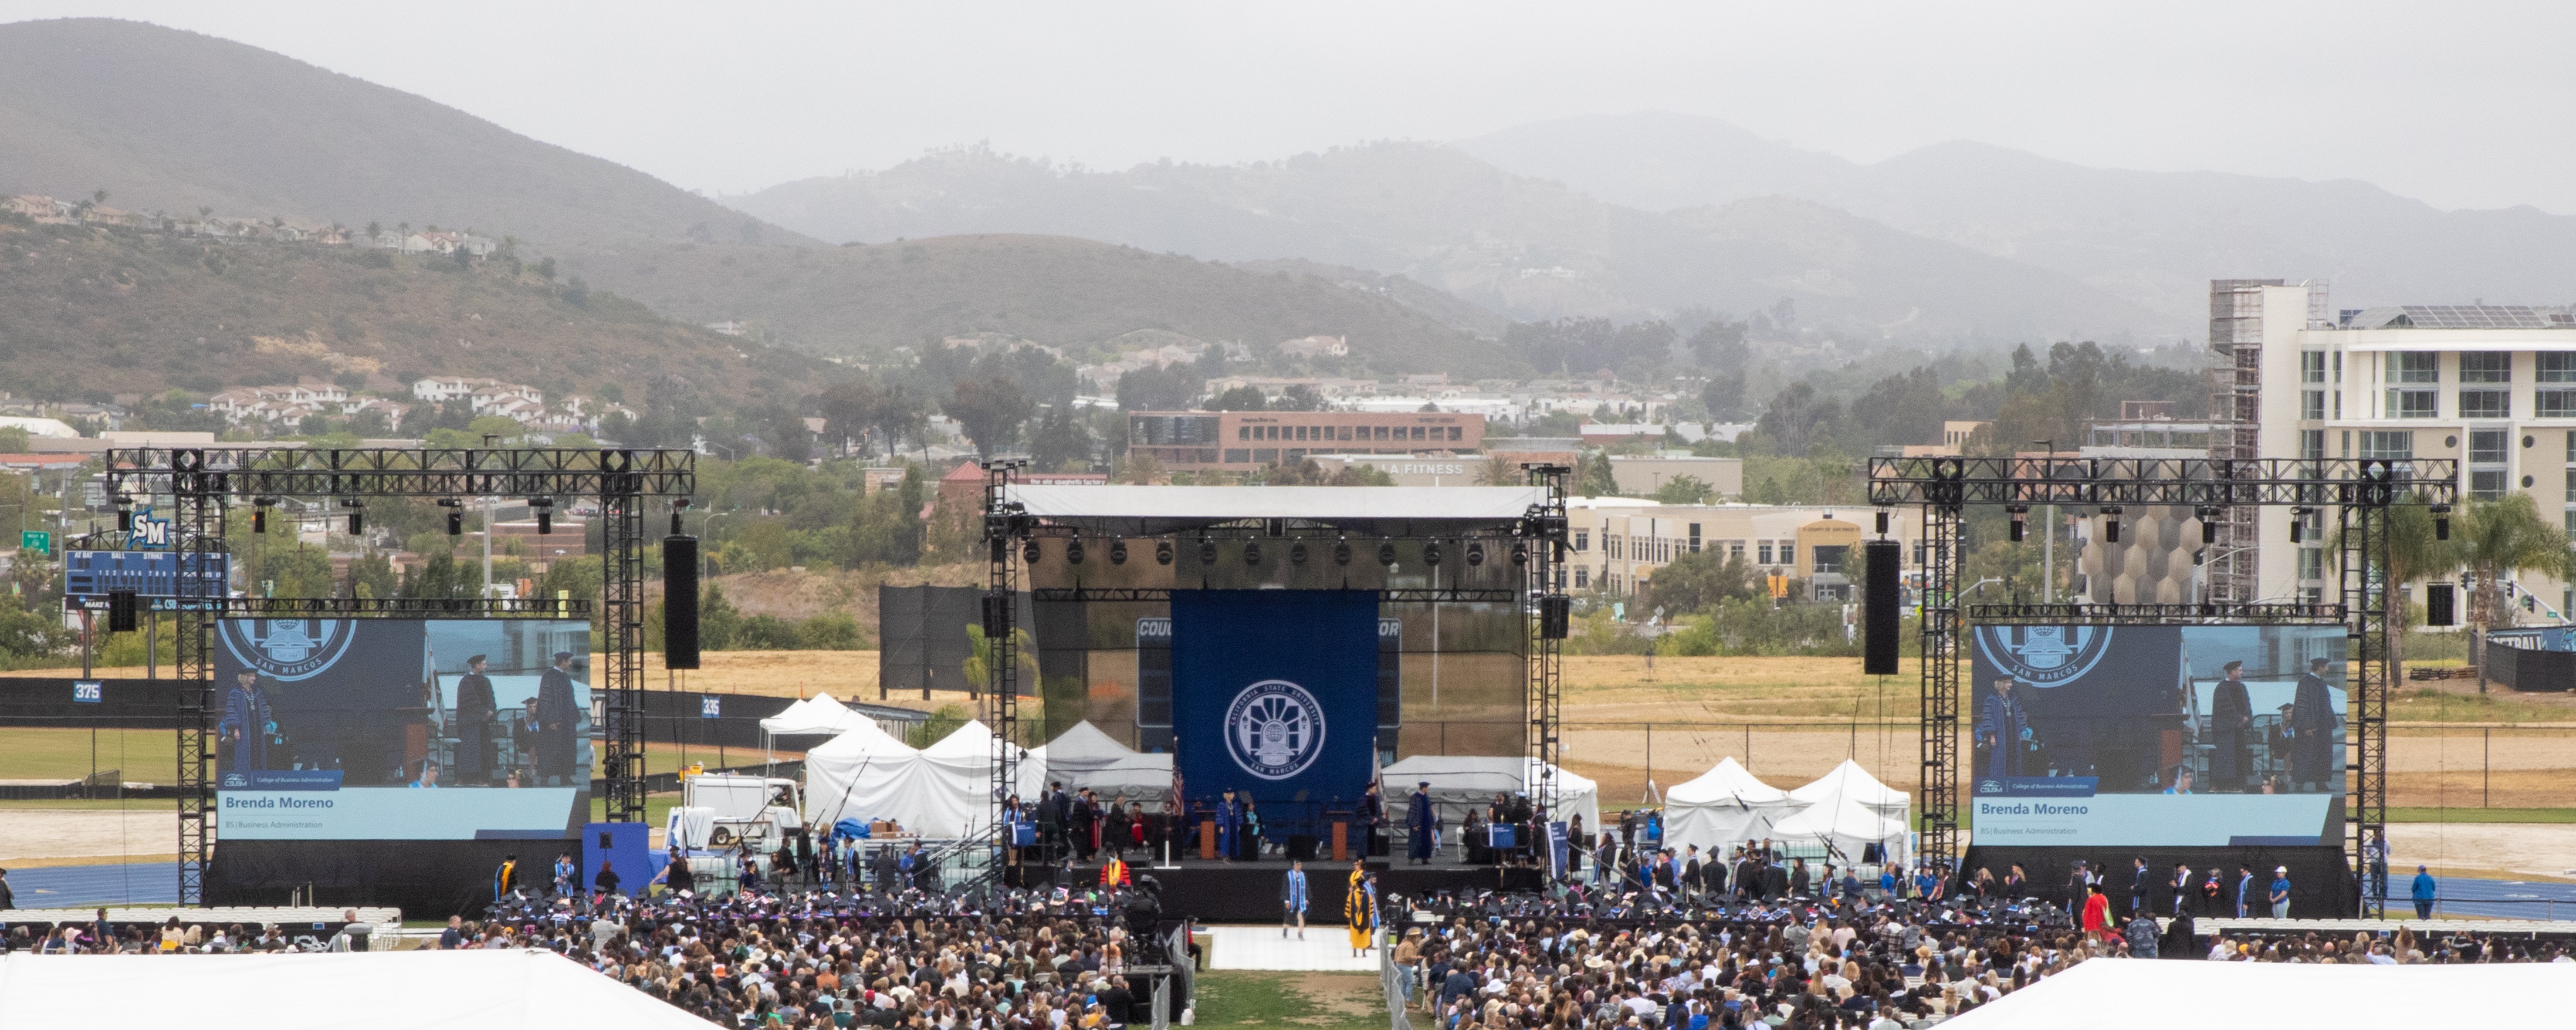 Overhead view of Mangrum Track and Field at CSUSM May Commencement